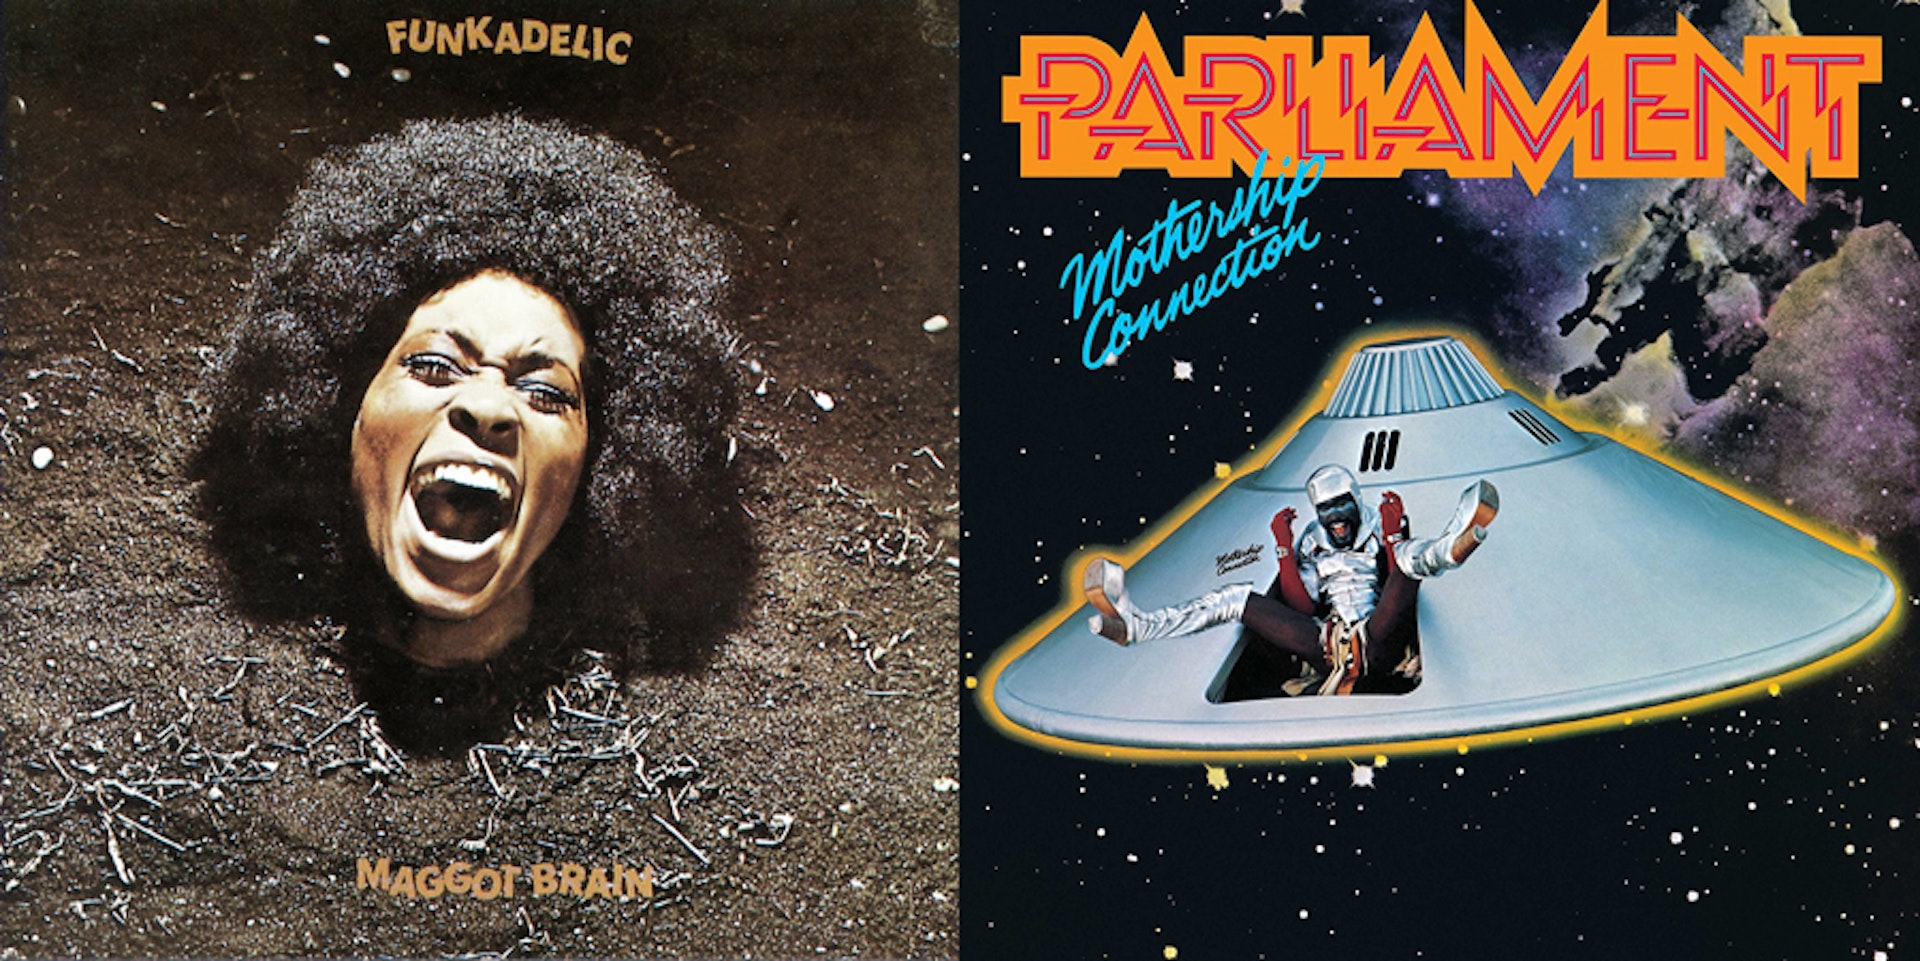 Two groundbreaking albums from different strands of George Clinton’s P-Funk collective: Funkadelic’s Maggot Brain, released in 1971, and Parliament’s Mothership Connection from 1975.